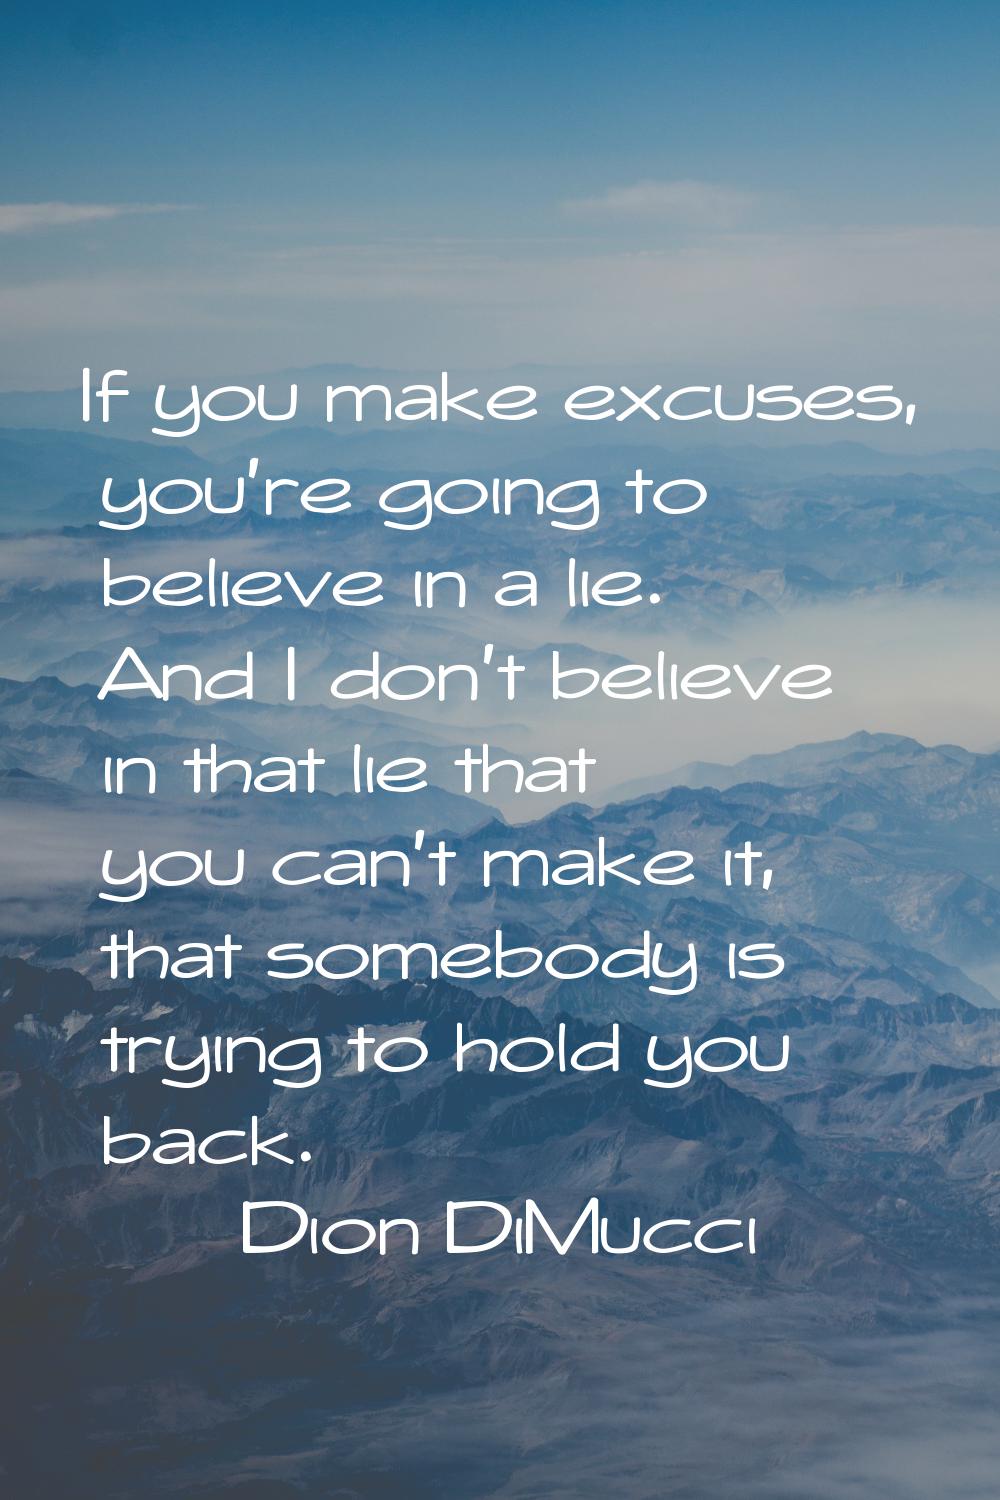 If you make excuses, you're going to believe in a lie. And I don't believe in that lie that you can